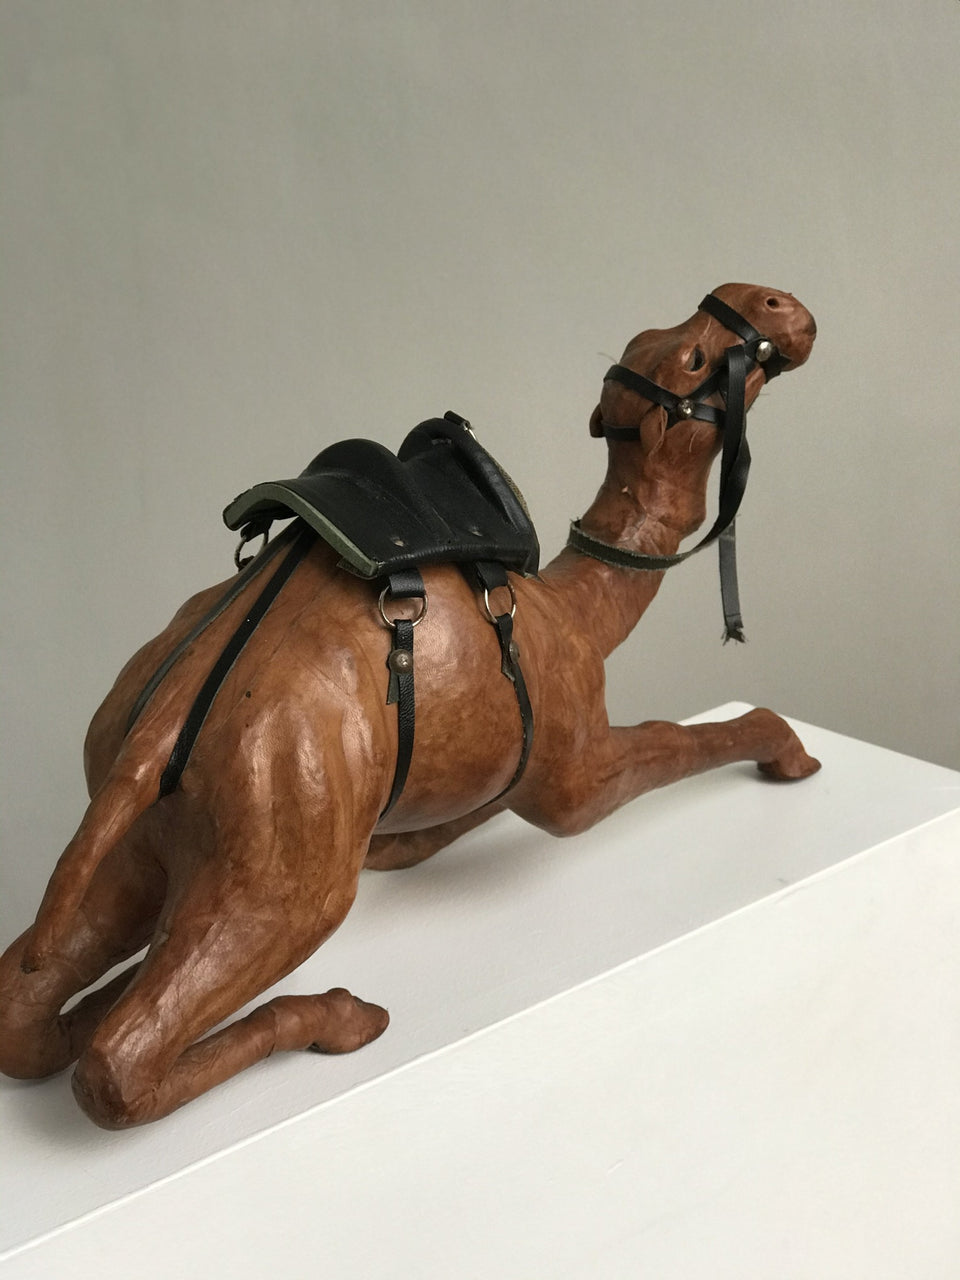 Leather Camel